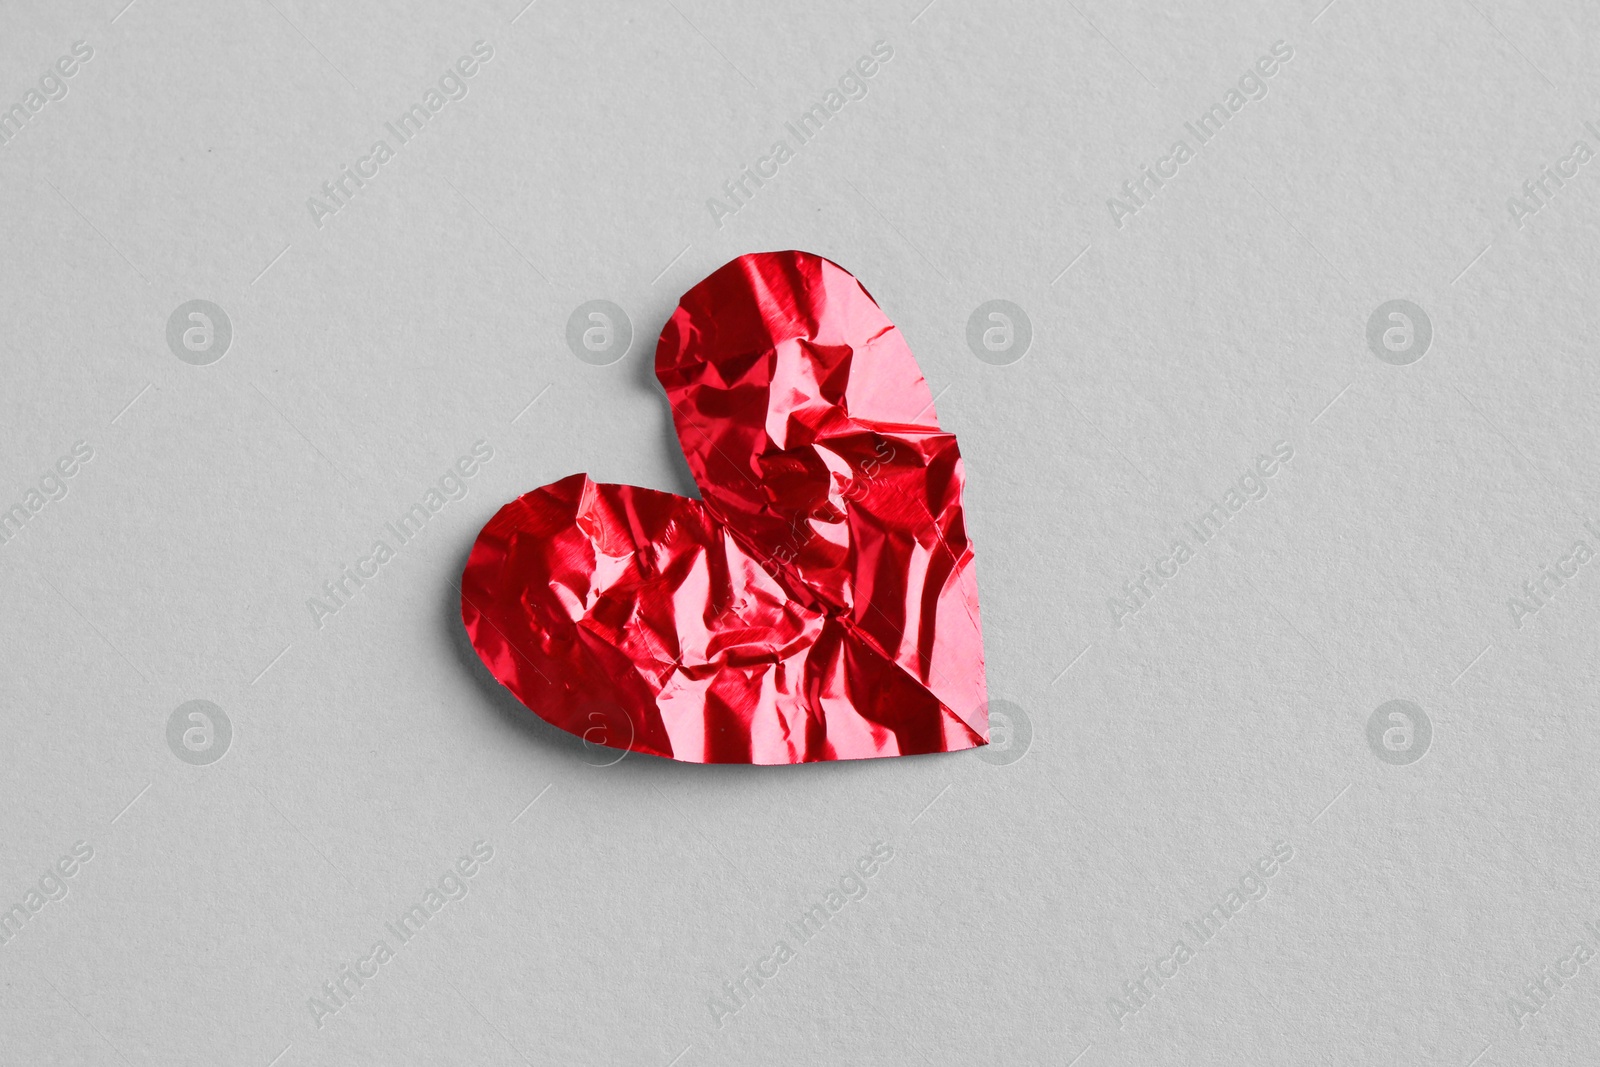 Photo of Red crumpled paper heart on gray background, top view. Breakup concept